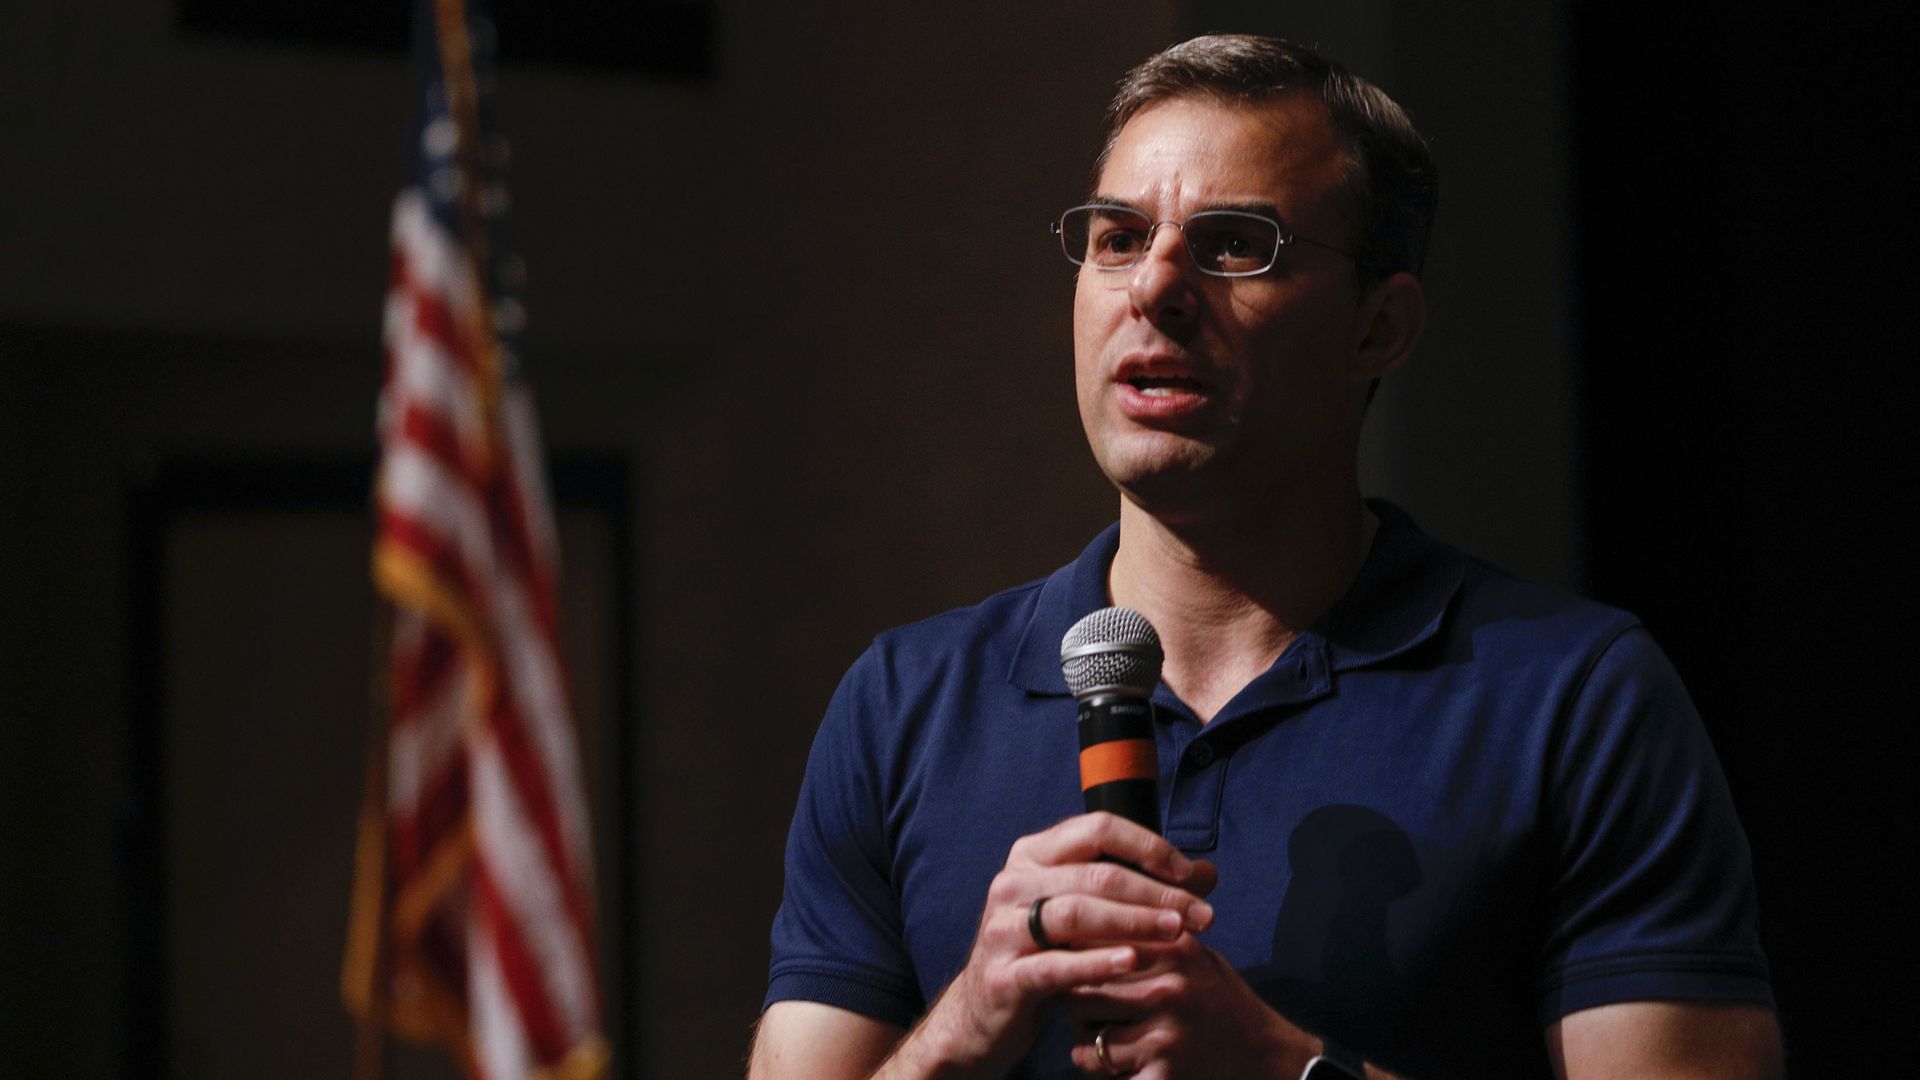 Rep. Justin Amash (R-MI) holds a Town Hall Meeting on May 28, 2019 in Grand Rapids, Michigan. 